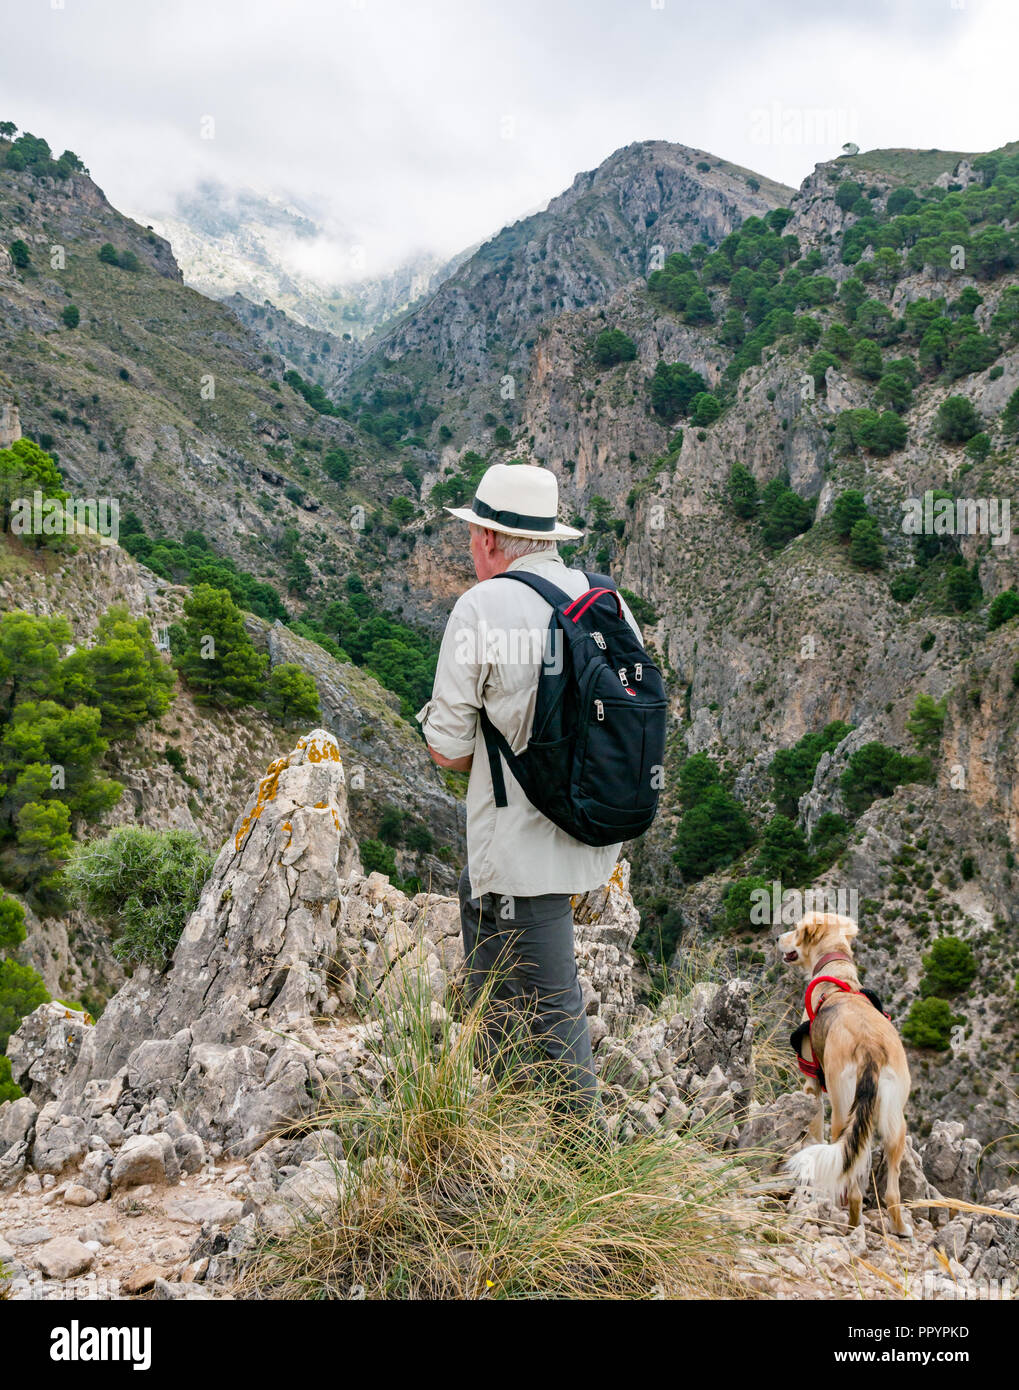 Man wearing Panama hat and dog admiring gorge view, Sierras de Tejeda Natural Park, Axarquia, Andalusia, Spain Stock Photo